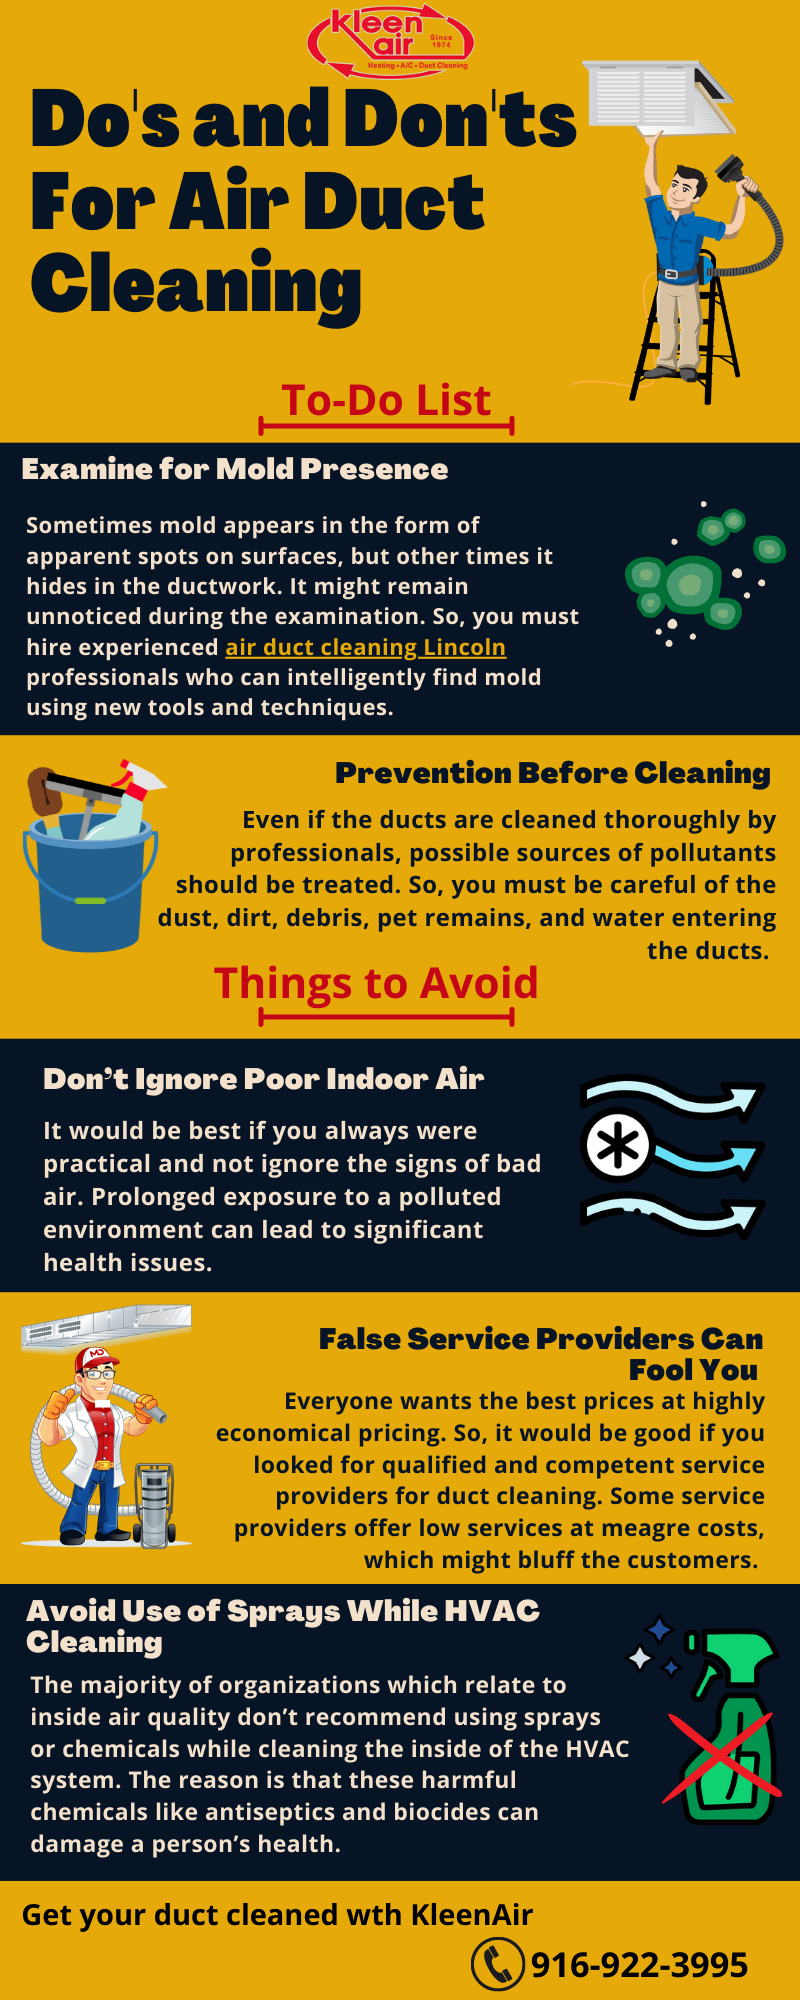 Do’s and Don’ts For Air Duct Cleaning